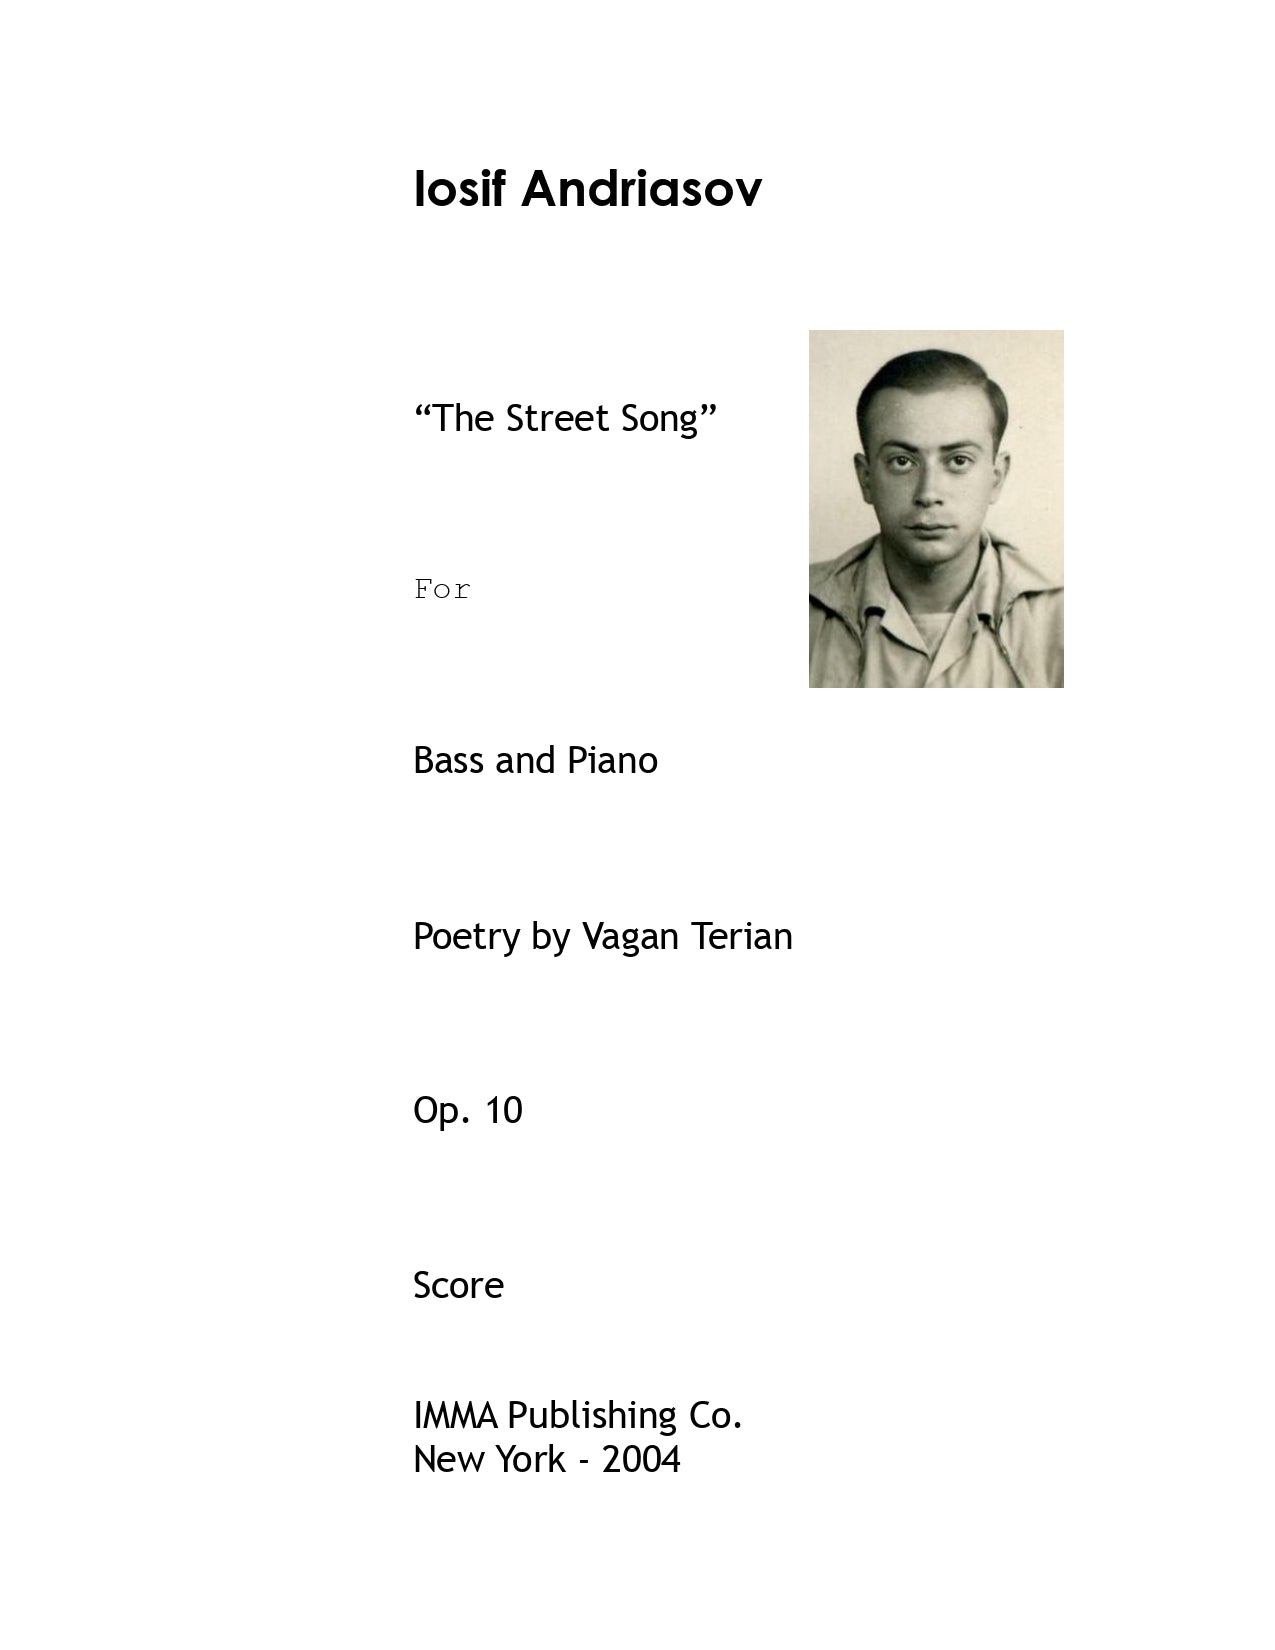 024. Iosif Andriasov: "The Street Song", Op. 10 for Bass and Piano.